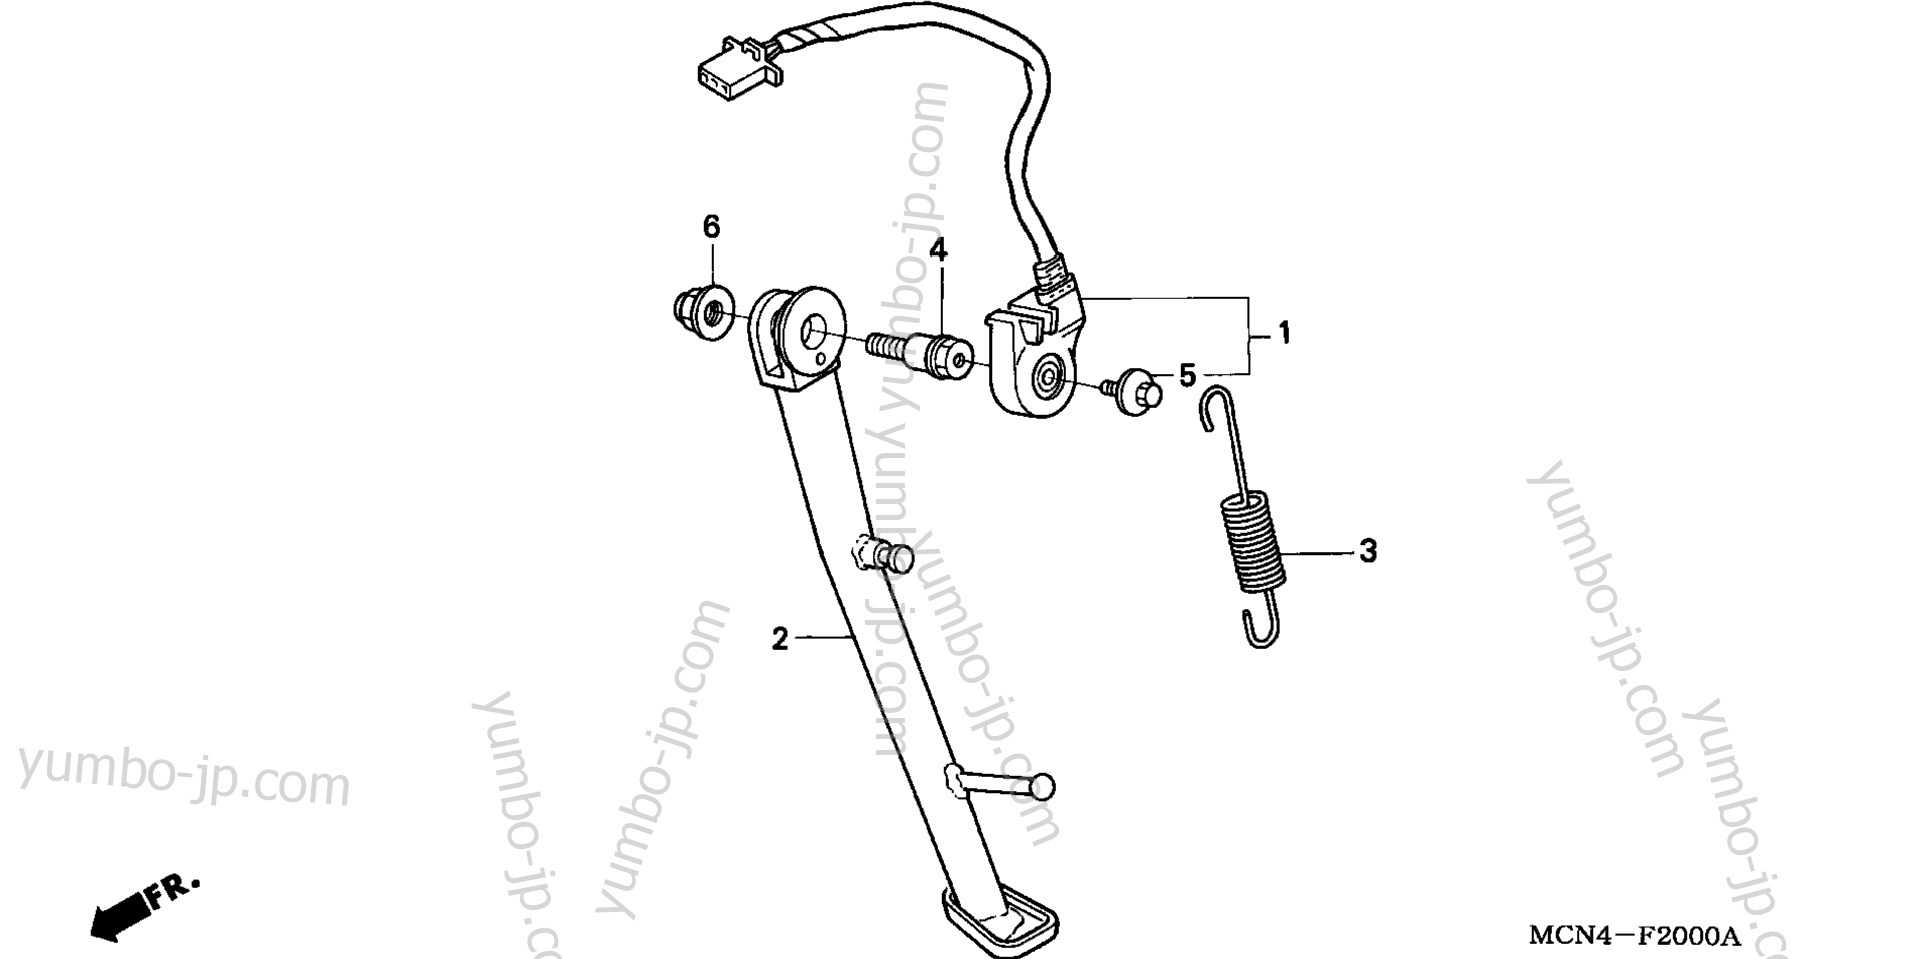 SIDE STAND for motorcycles HONDA CB750 A 2002 year